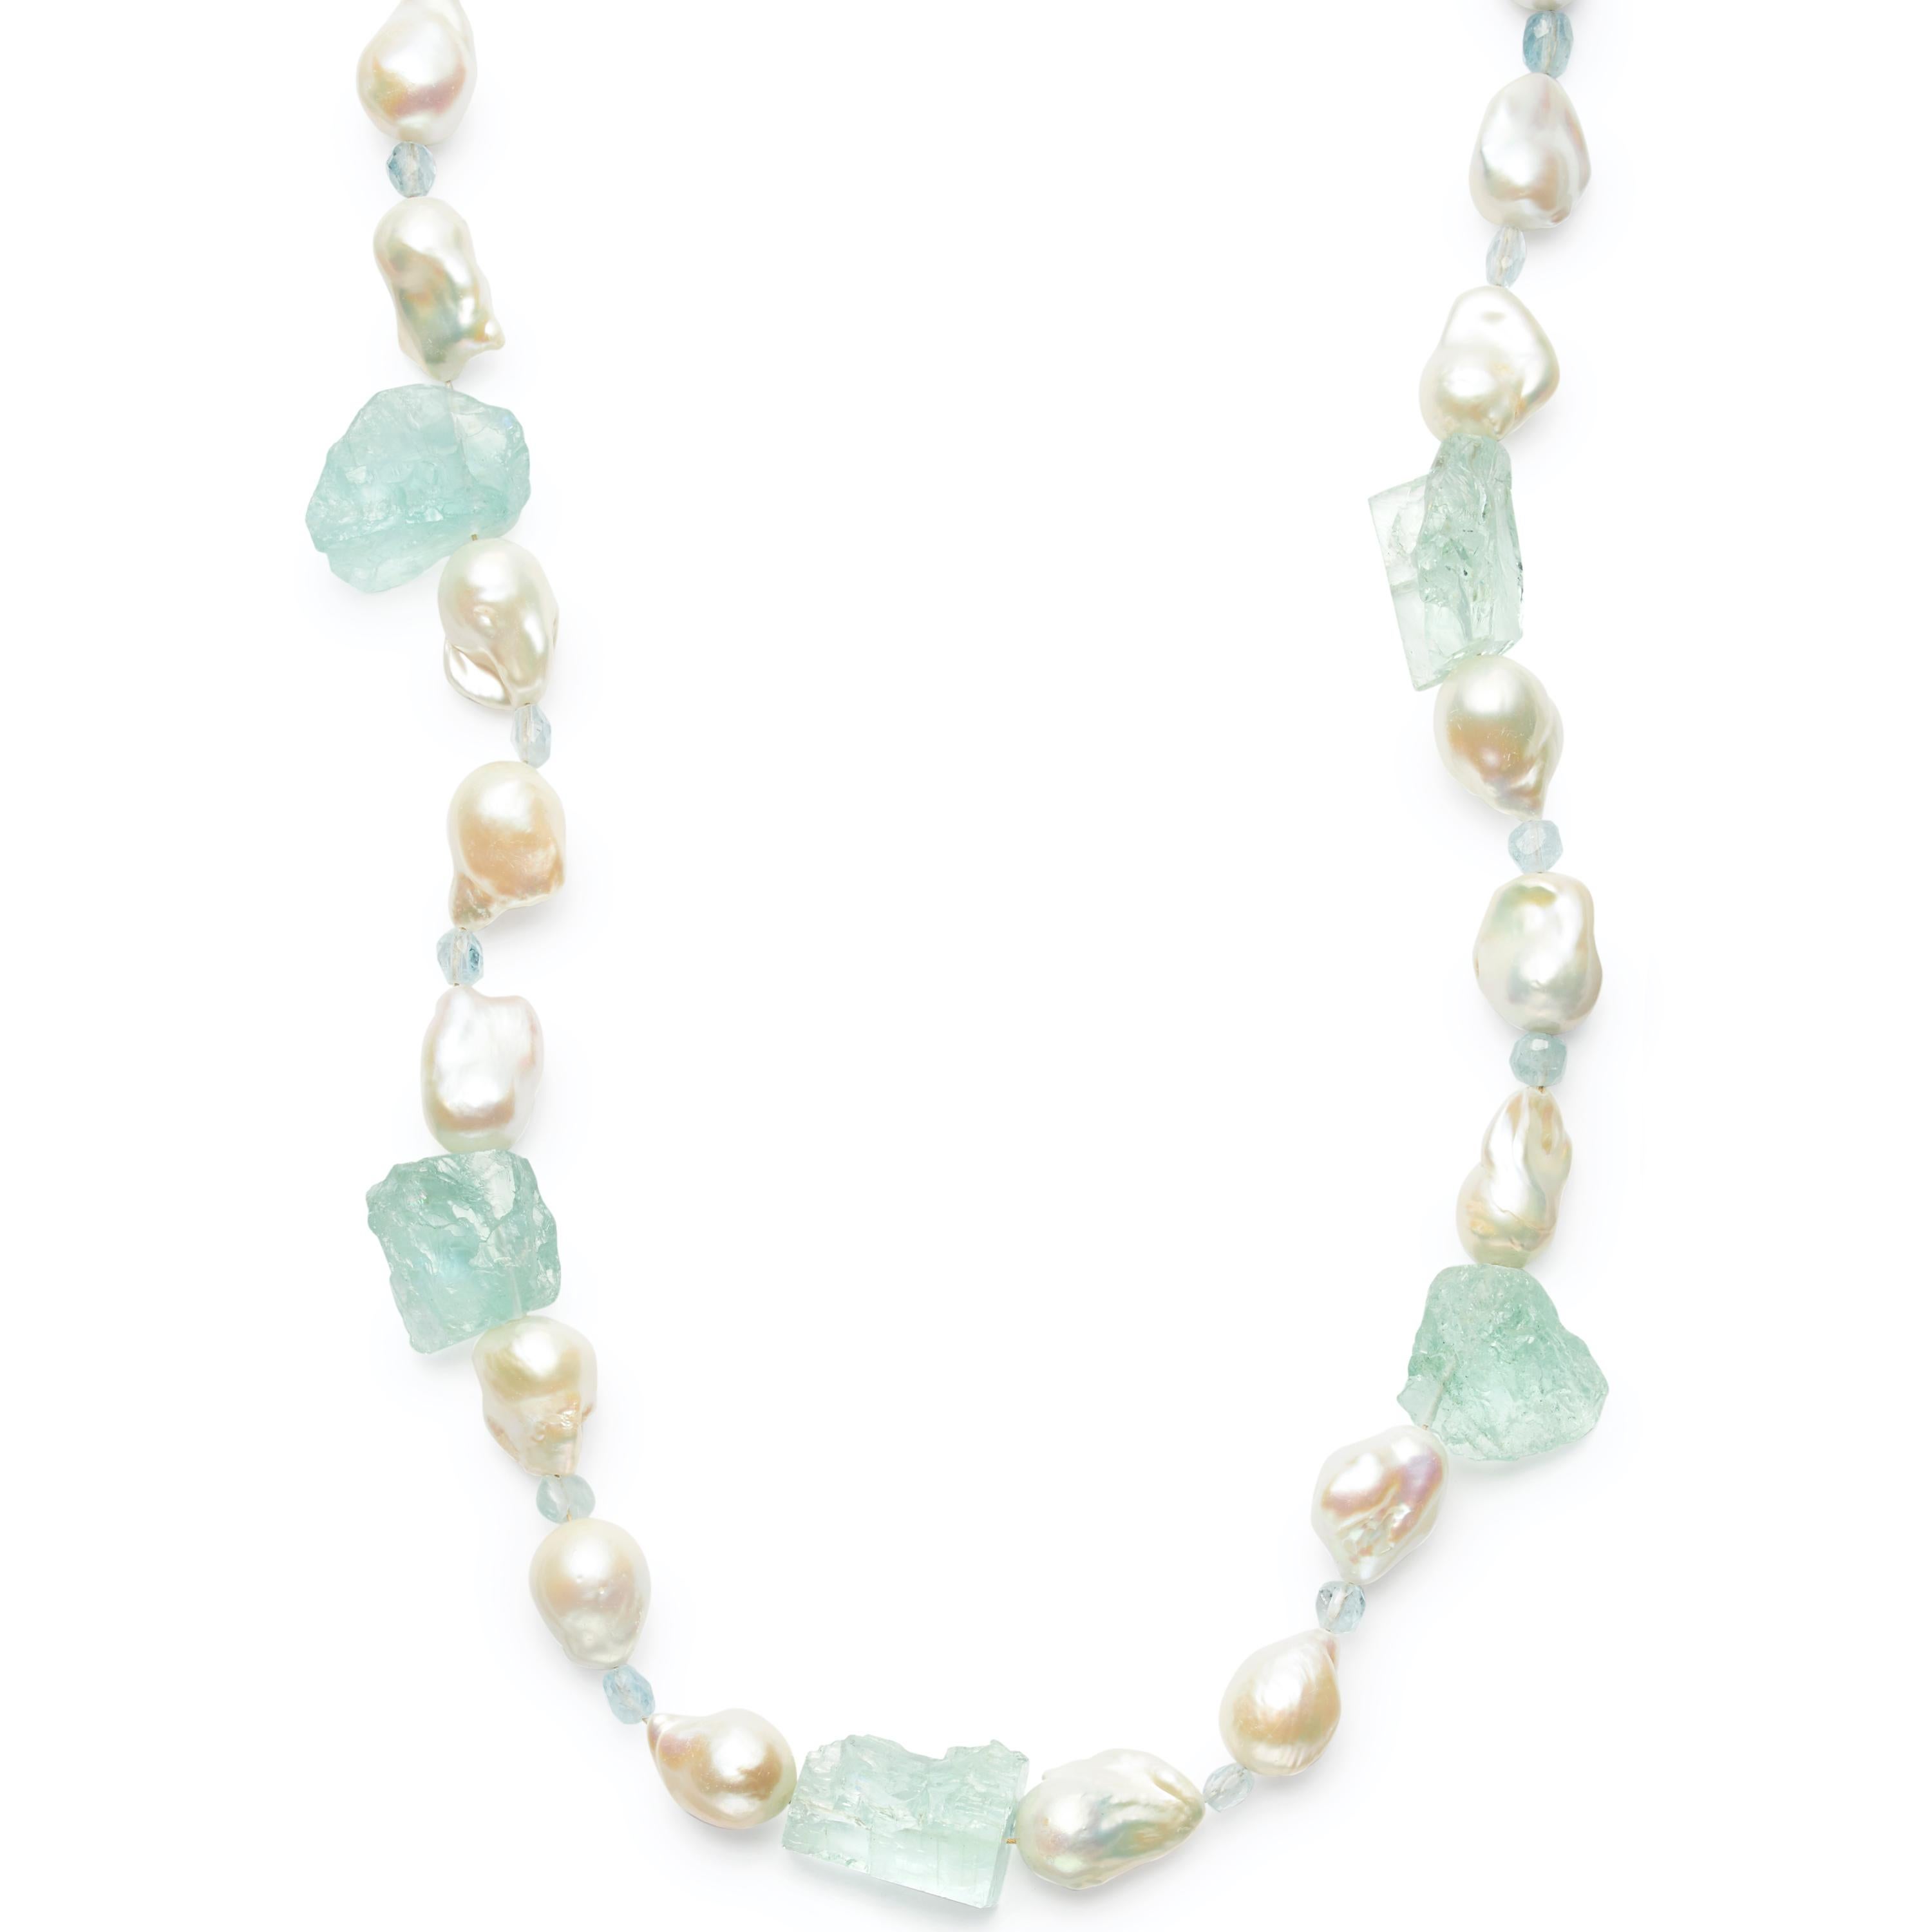 A stunning 32-inch statement strand of chunky Freshwater Pearls mixed with icy, Mirror Cut Aquamarine and 18 Karat Gold Rondelles.  Wear alone or layered. Secured with an 18 Karat Gold clasp.

